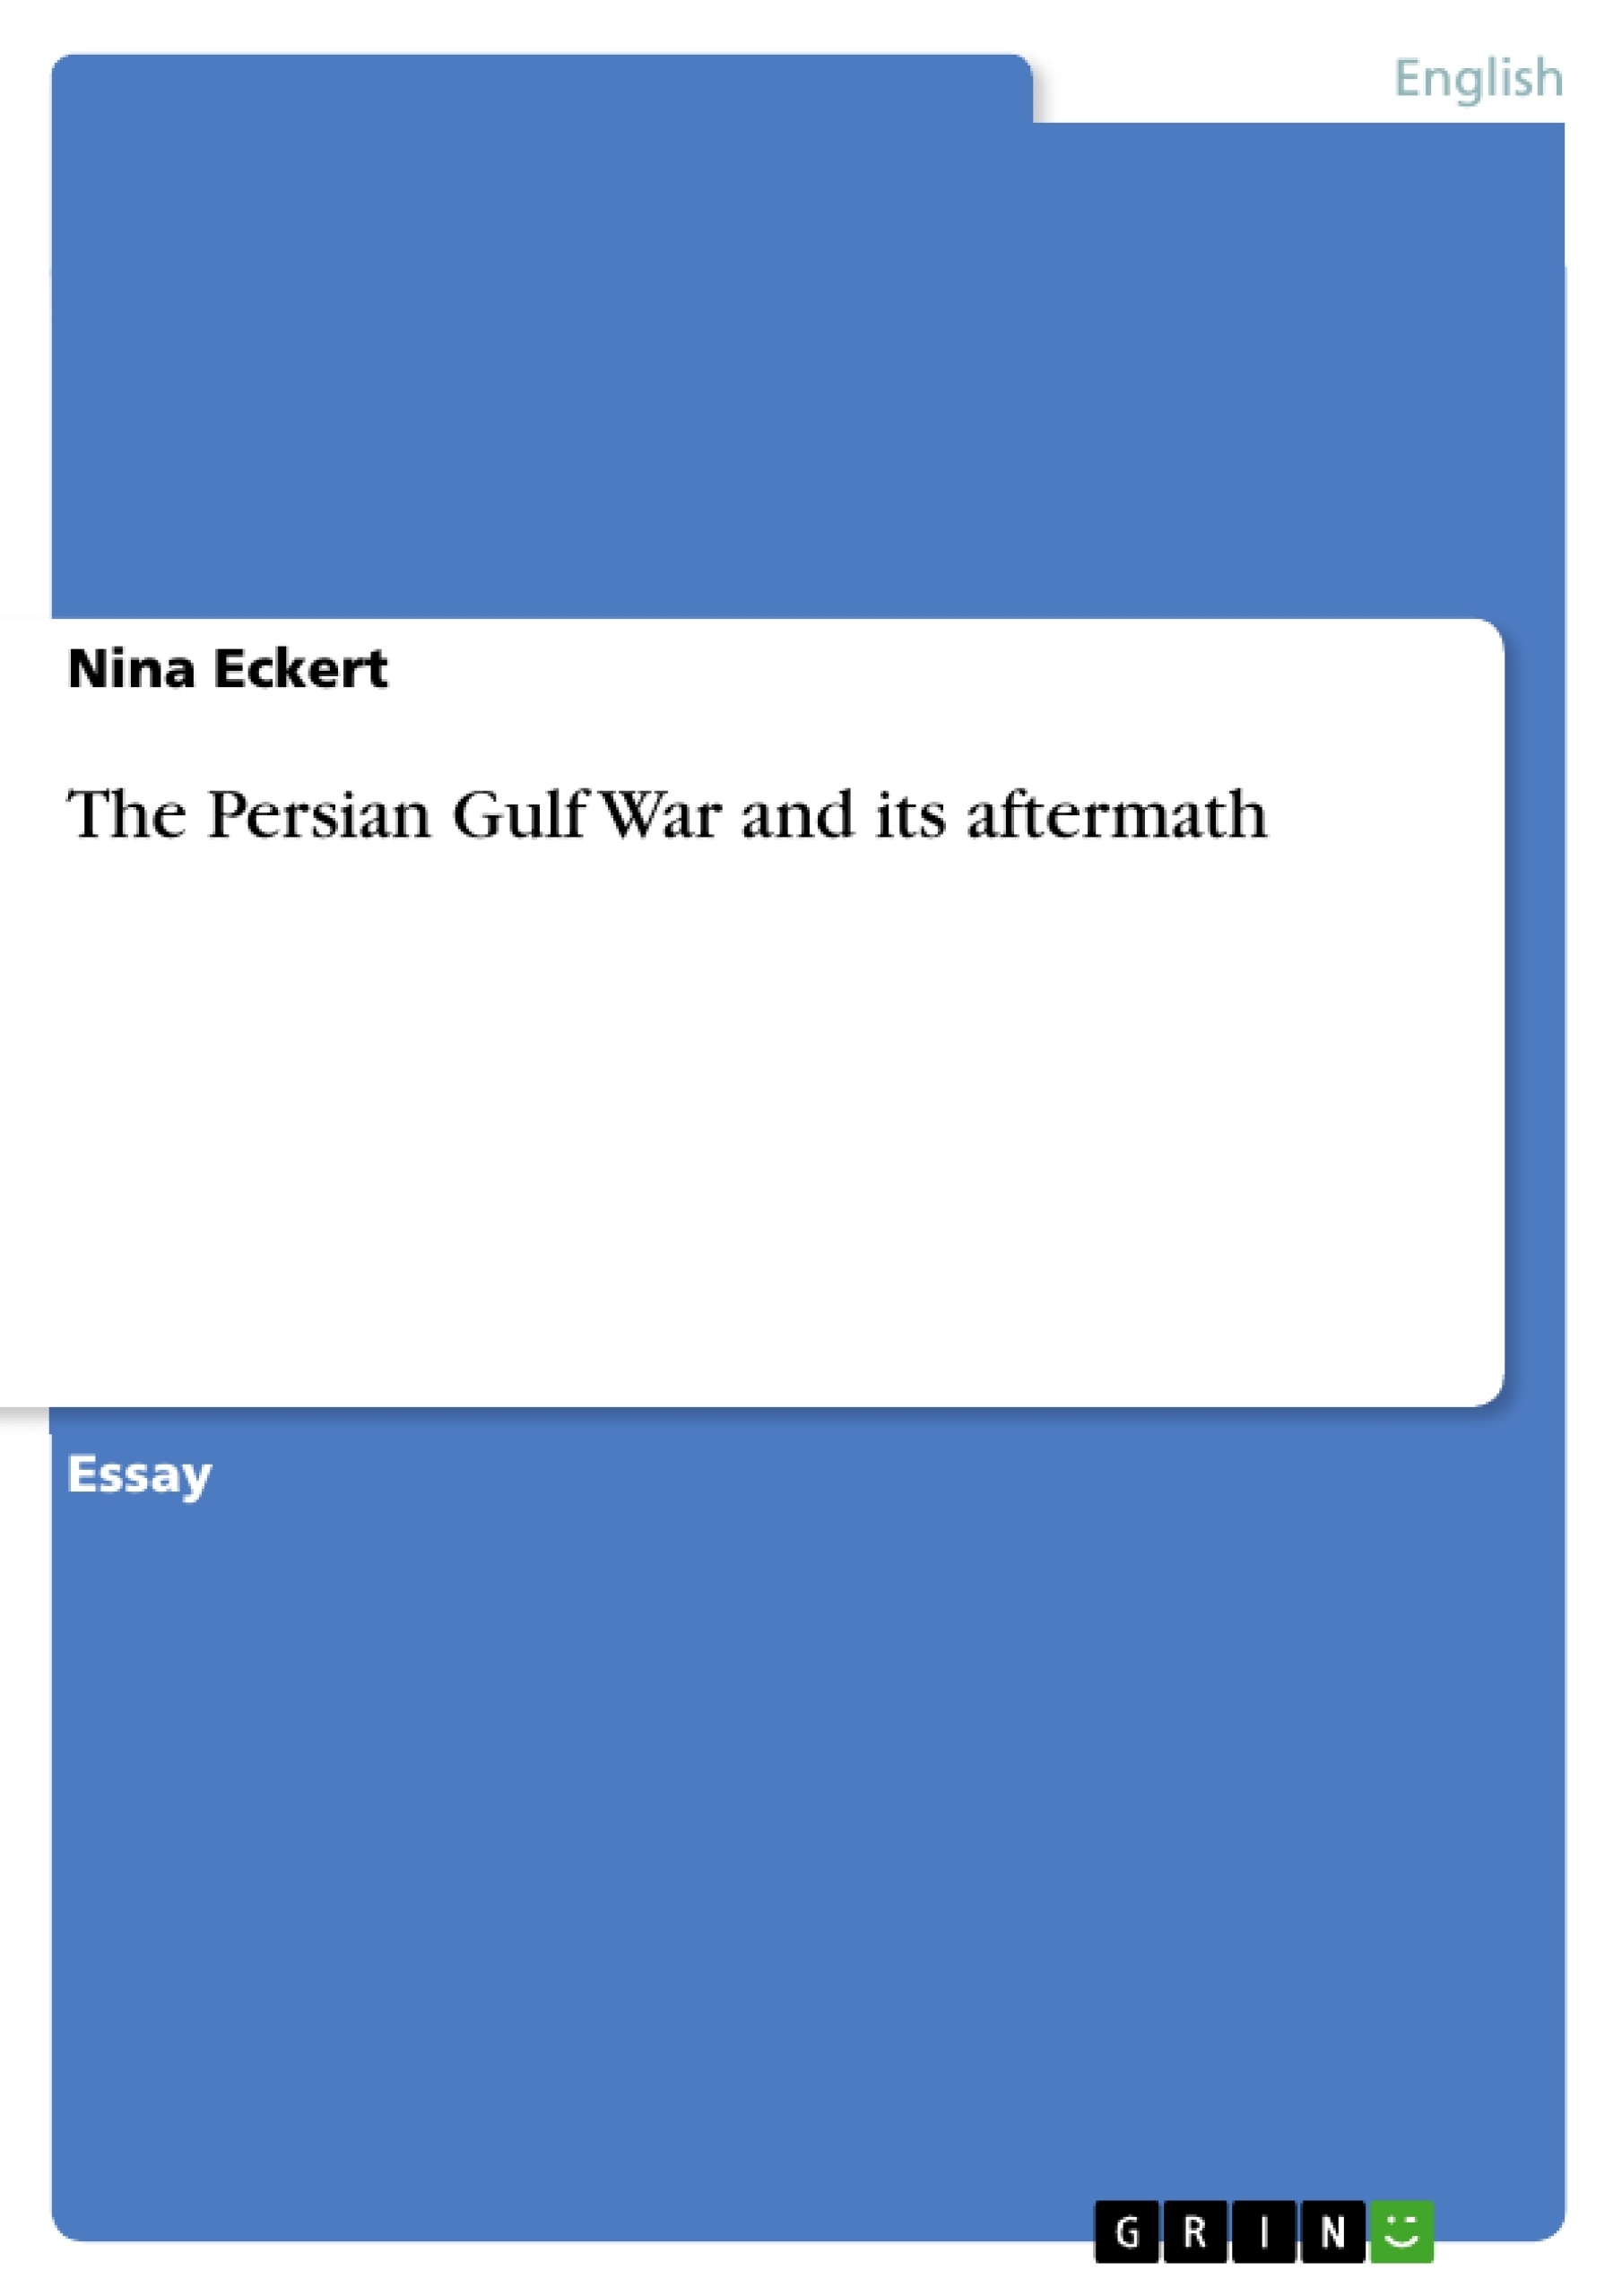 Titre: The Persian Gulf War and its aftermath